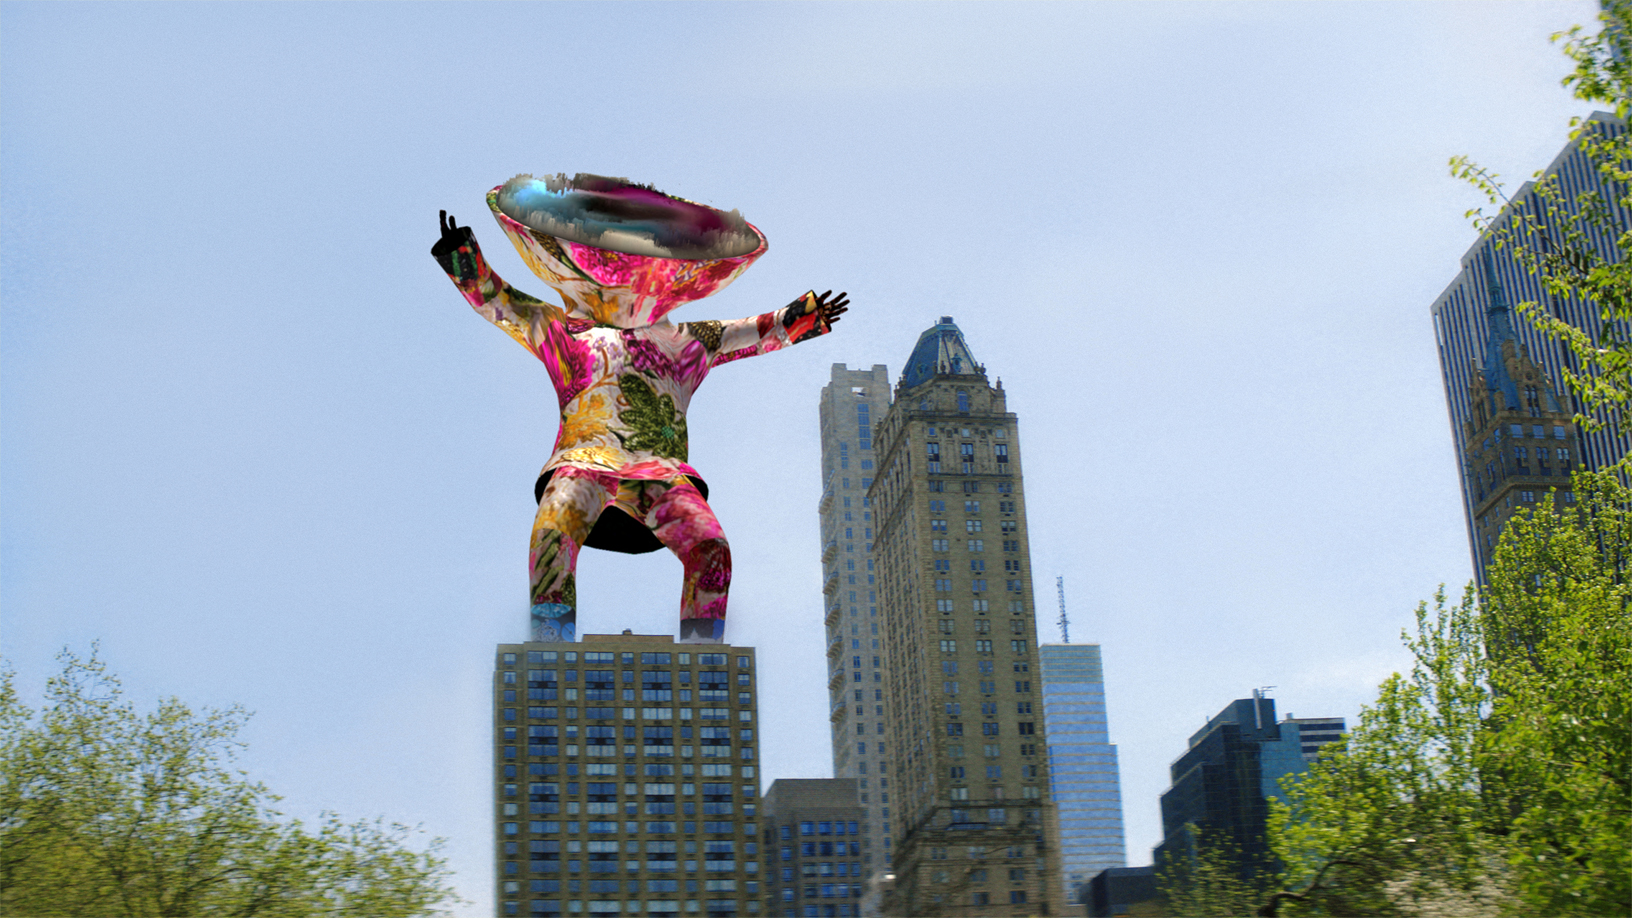 A 3D person in a colorful suit with a large disk for a head stands on top of a high rise.